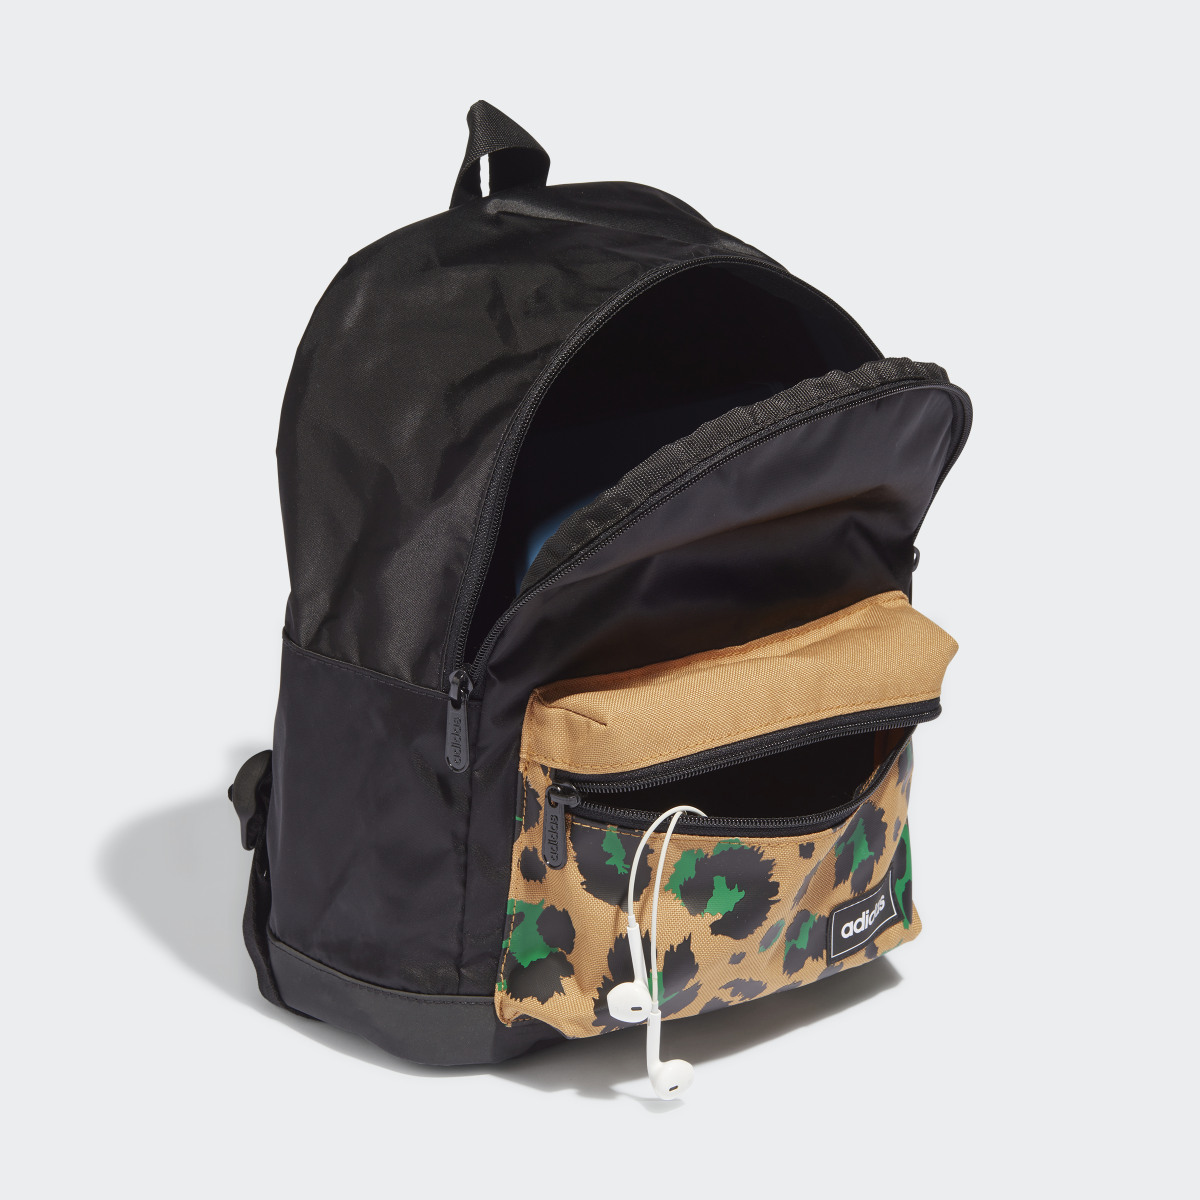 Adidas T4H XS Backpack. 5